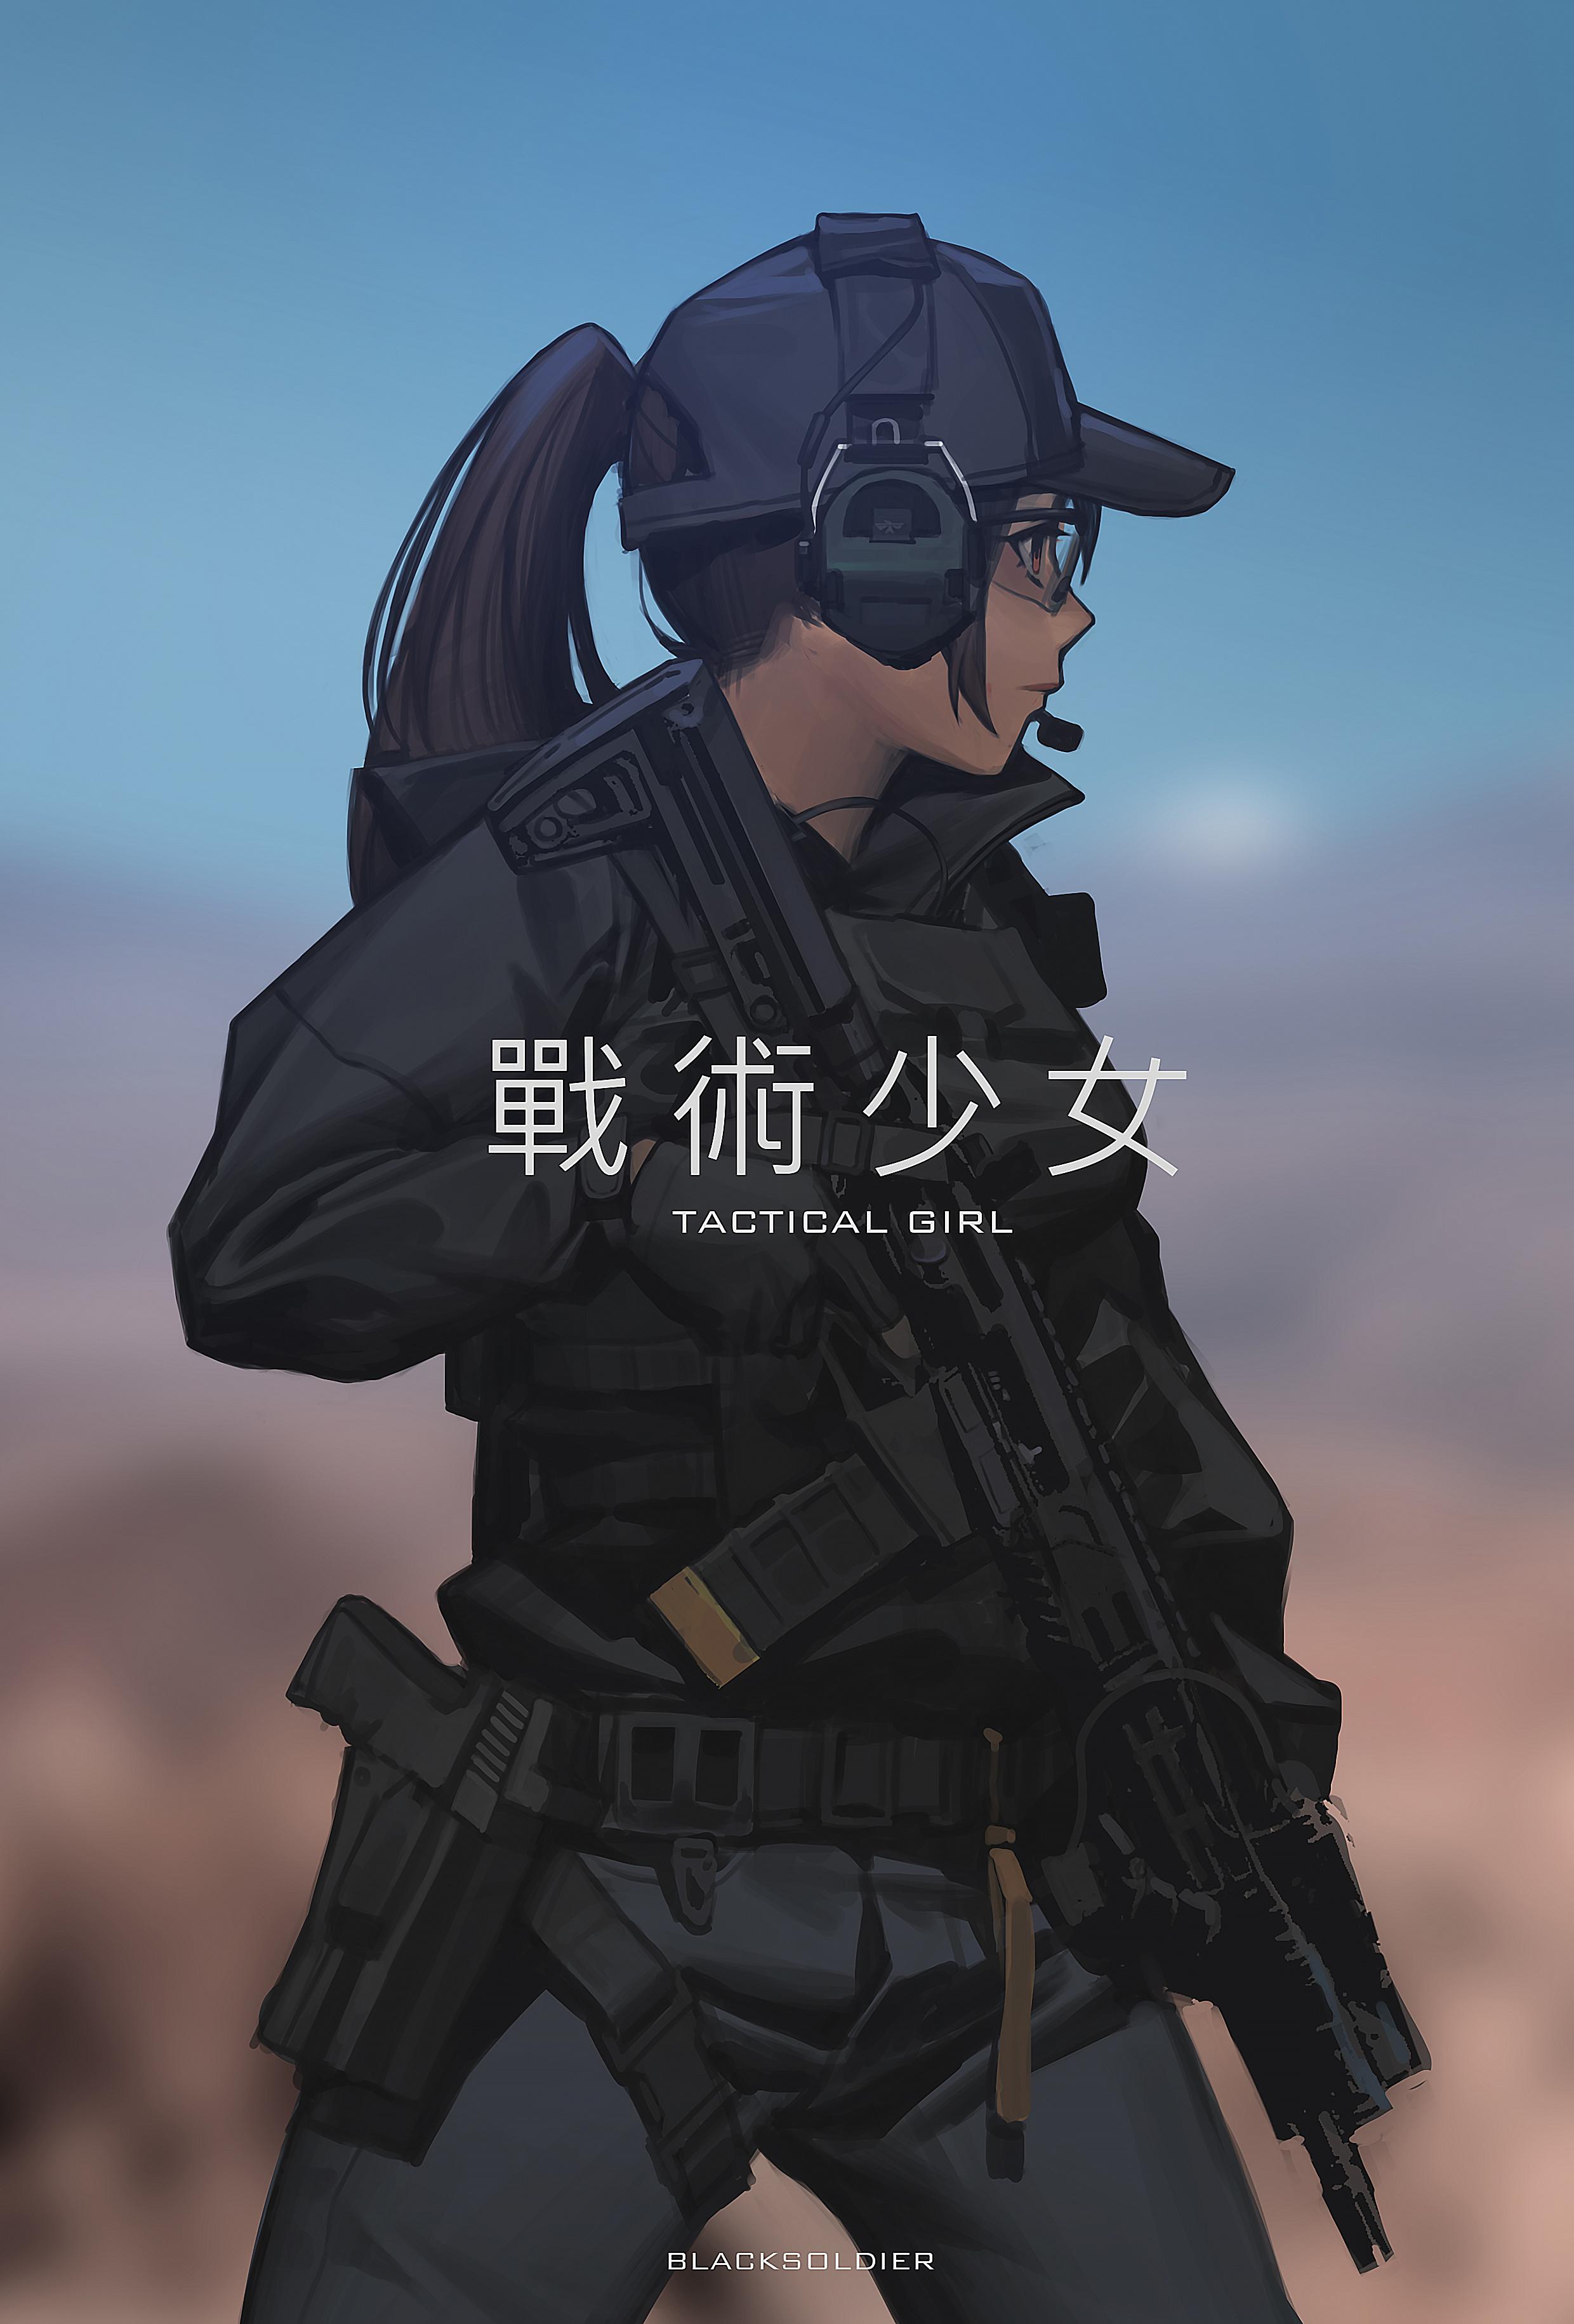 Anime 2480x3661 anime girls tactical special forces gun portrait display rifles Black Soldier operator anime girls with guns black clothing tactical girl